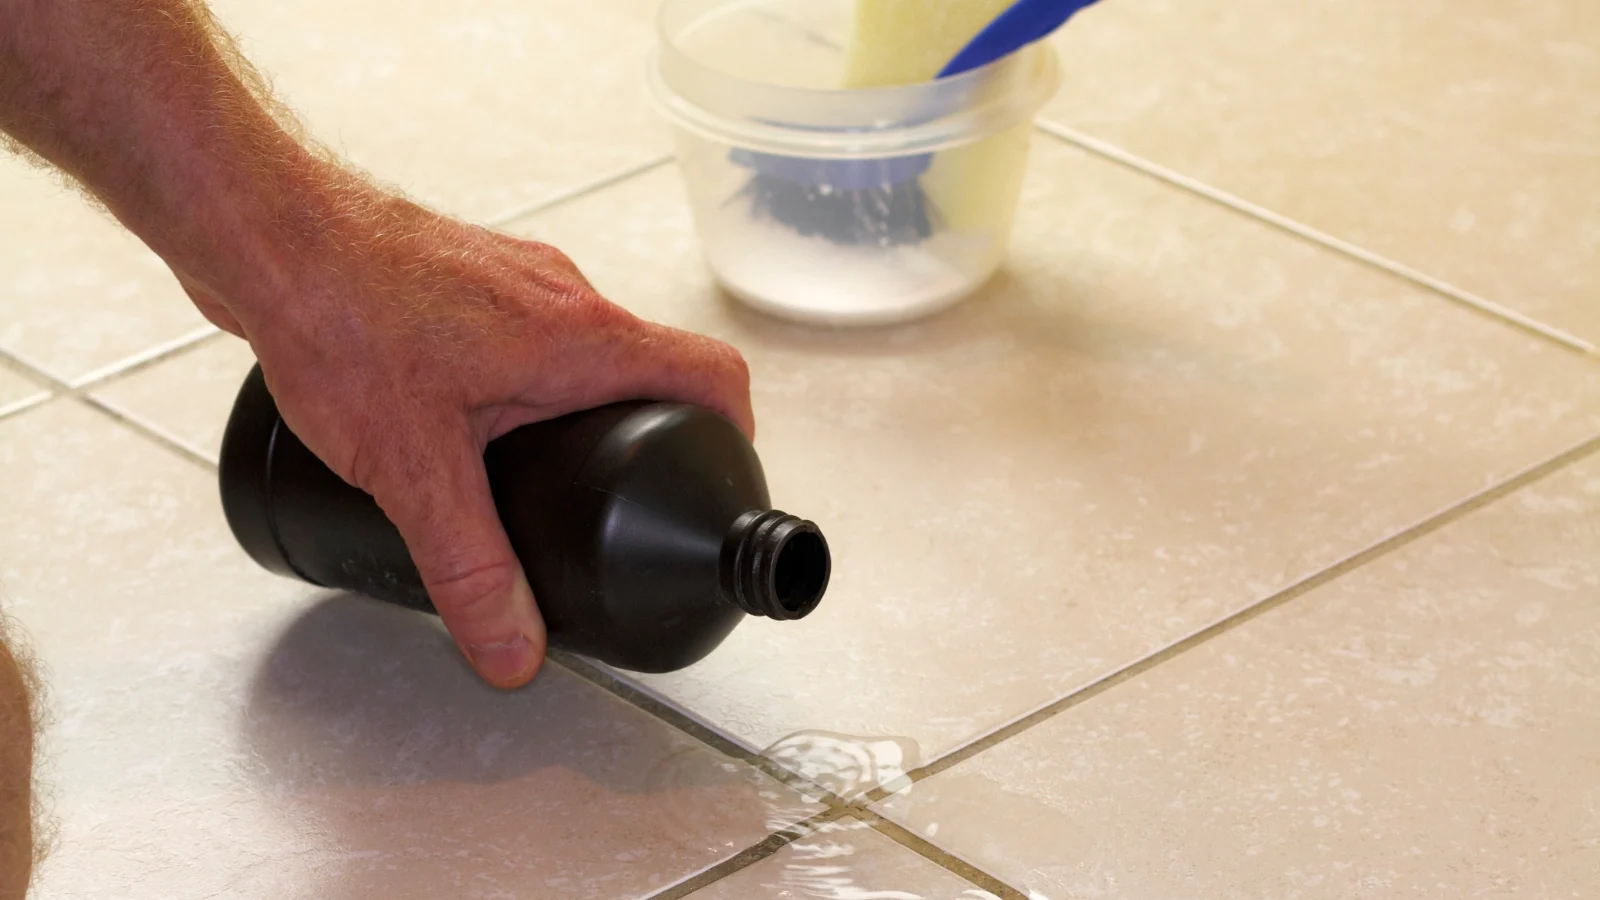 A person cleaning a tile floor with a bottle.